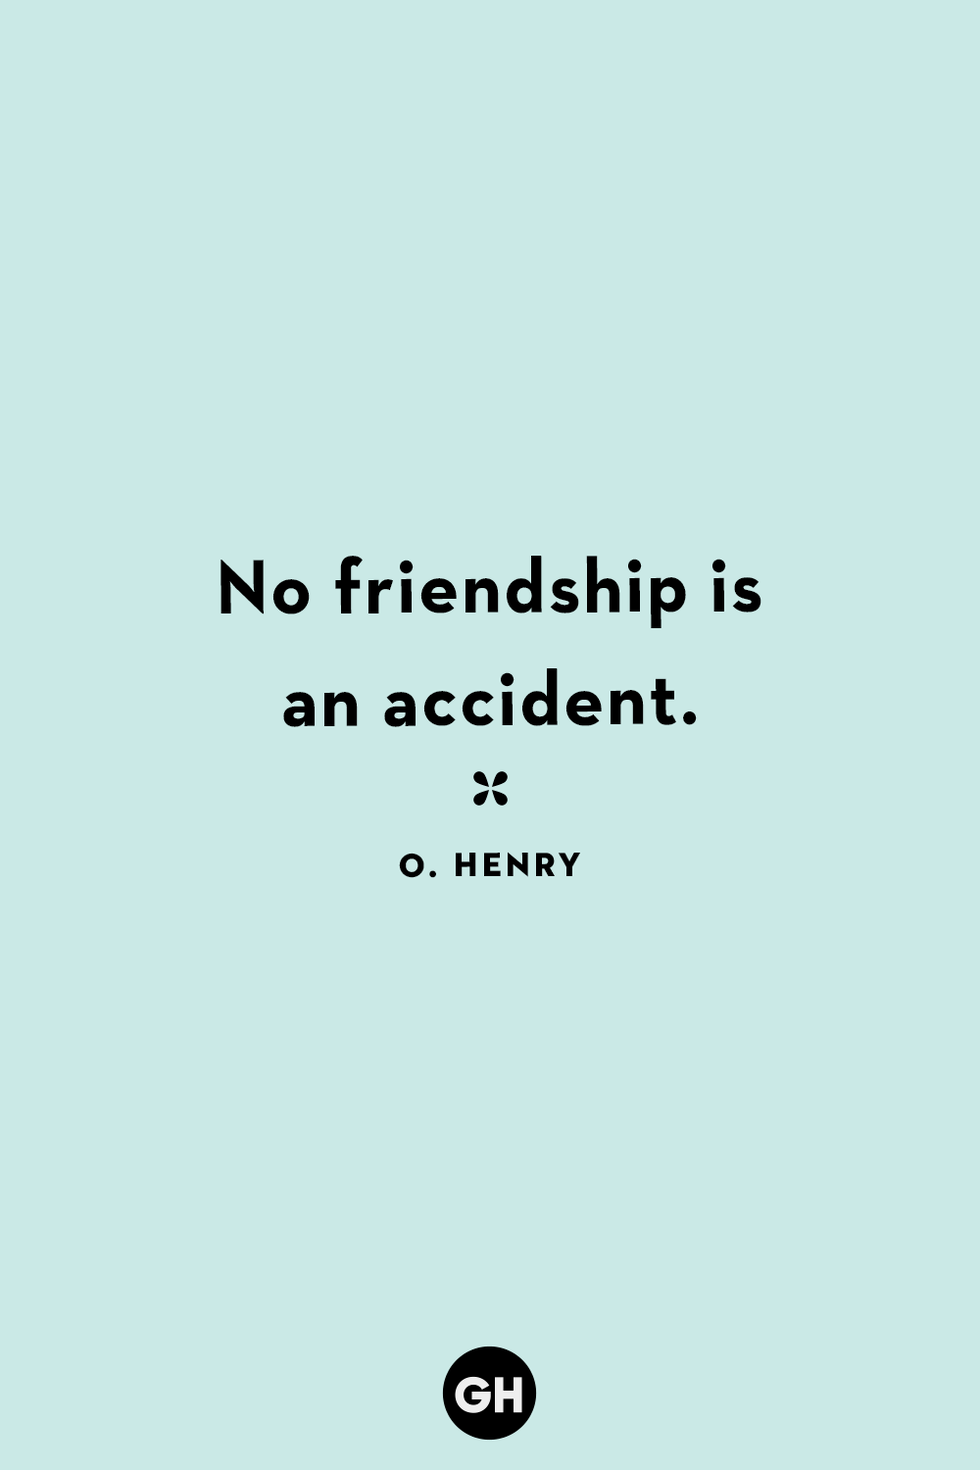 https://hips.hearstapps.com/hmg-prod/images/gh-friendship-quotes-o-henry-6449332ea6a3b.png?crop=1xw:1xh;center,top&resize=980:*